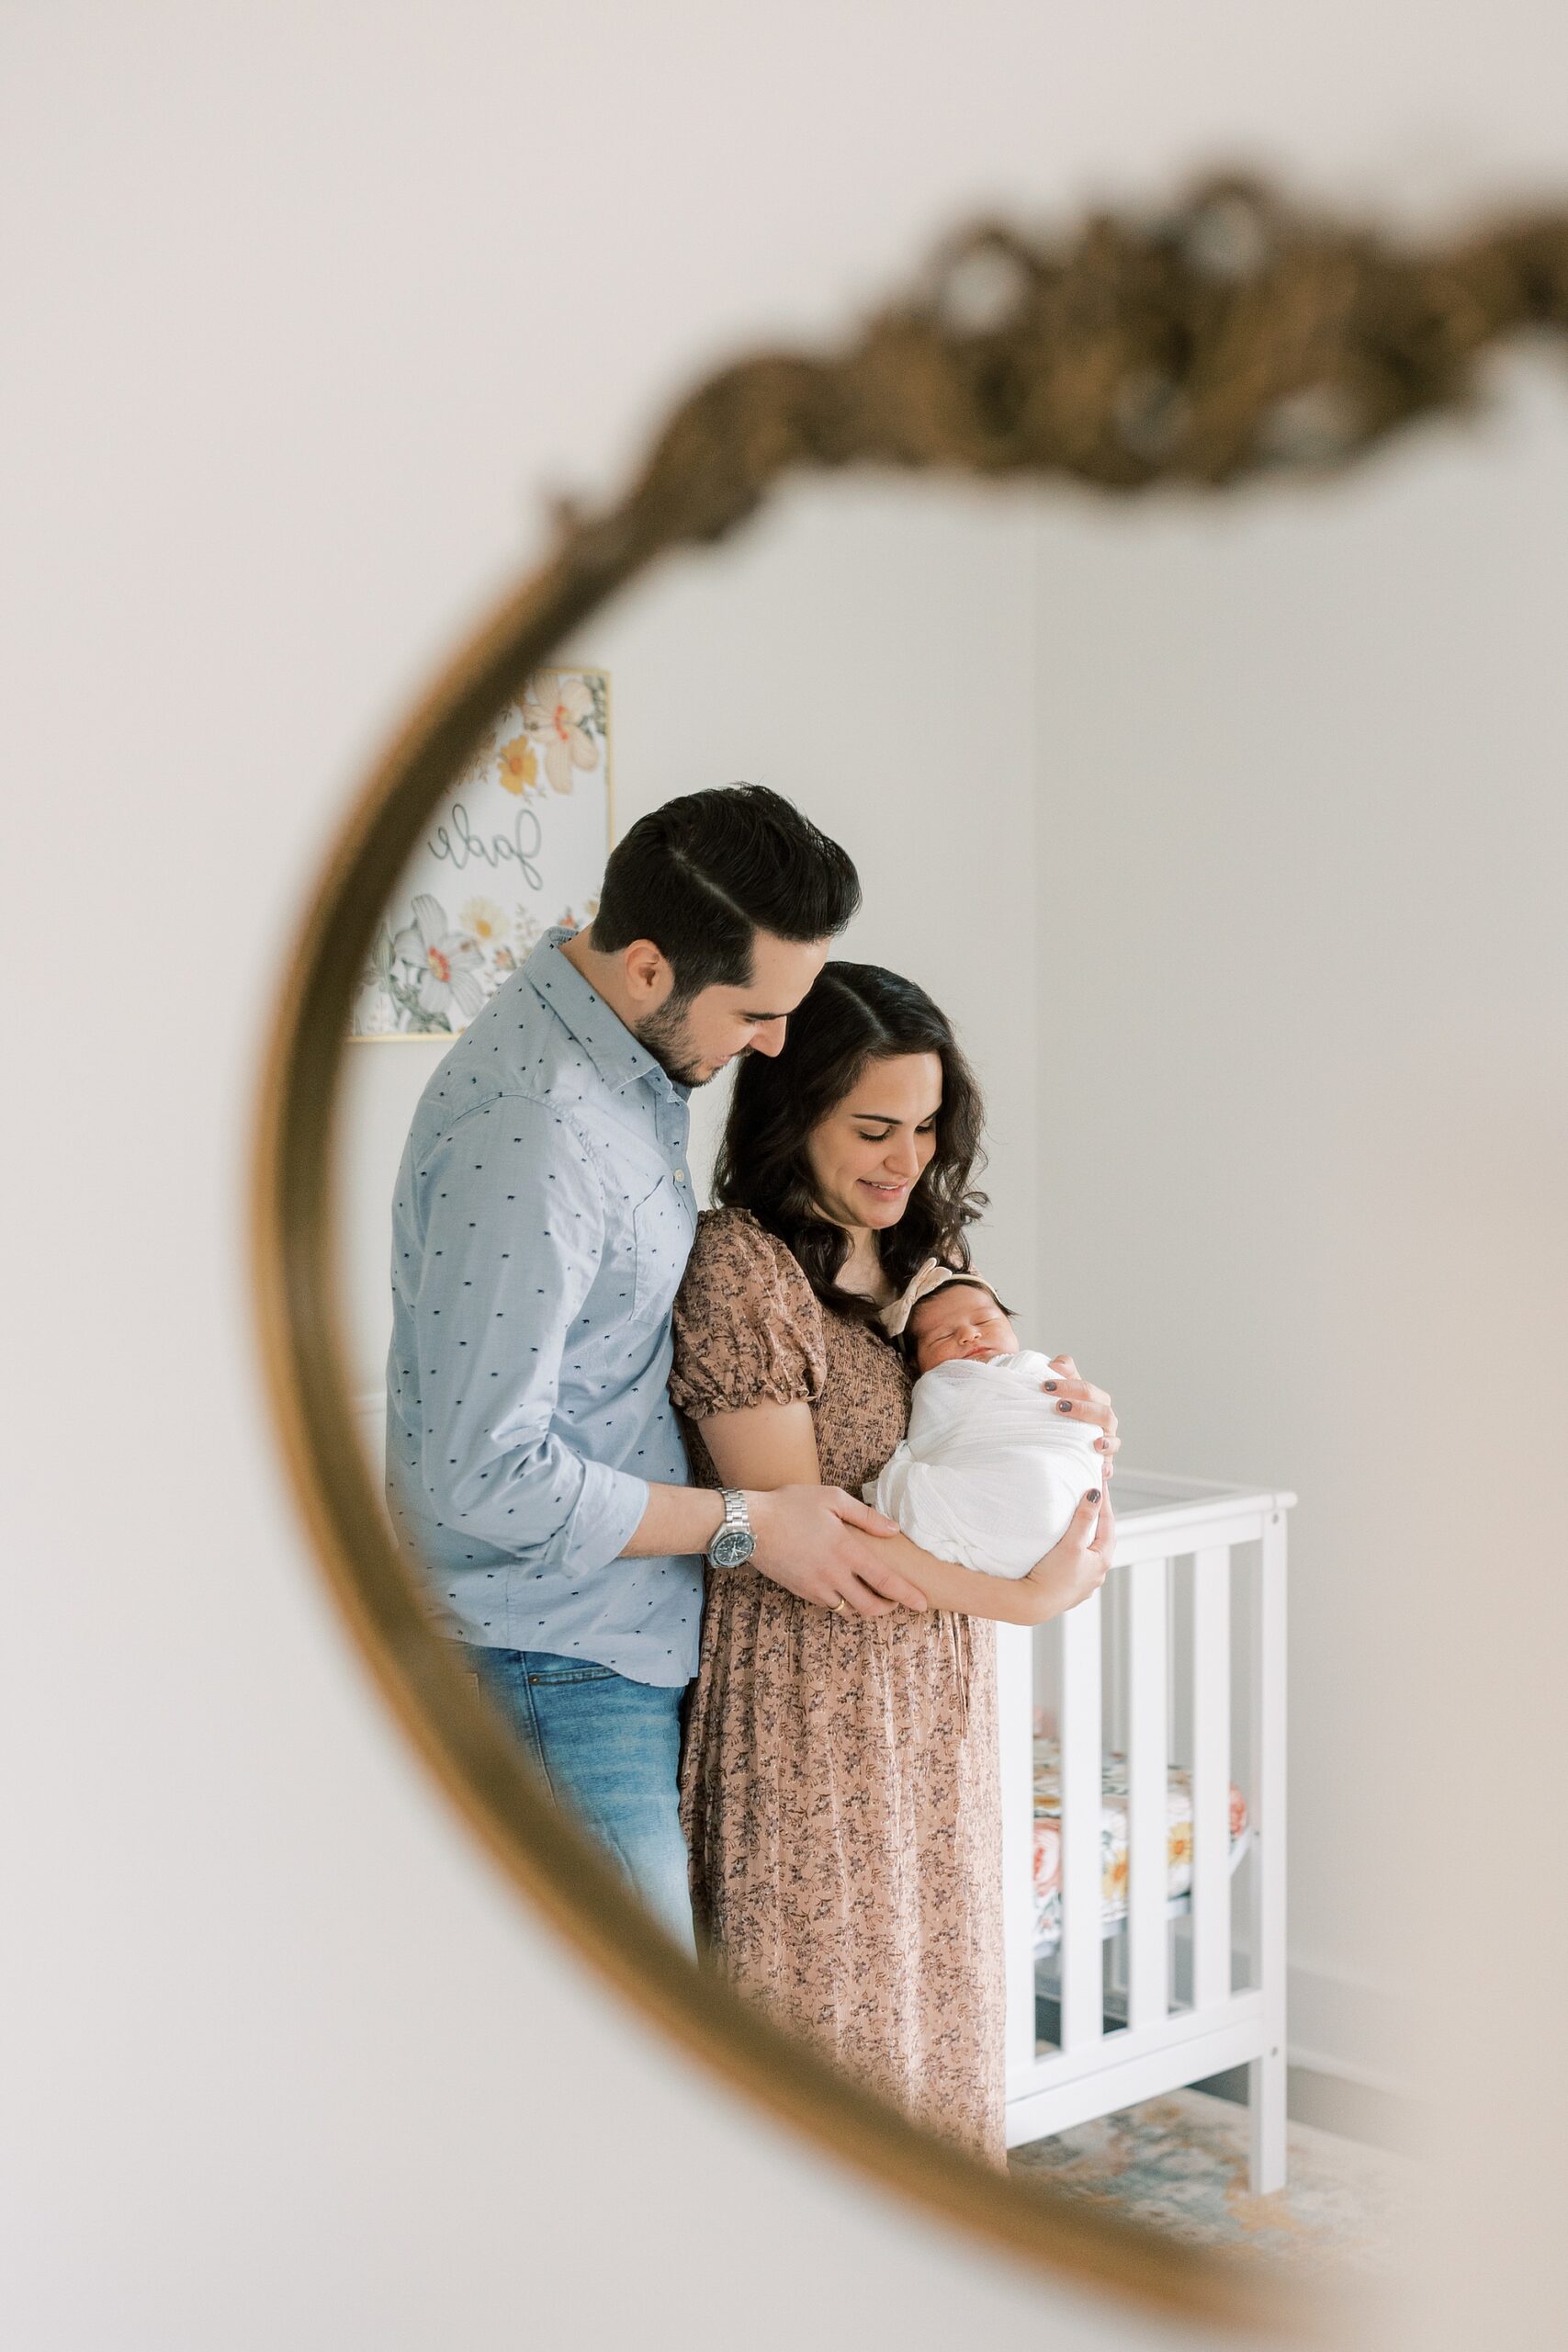 reflection of wife and husband holding newborn daughter in gold rimmed mirror